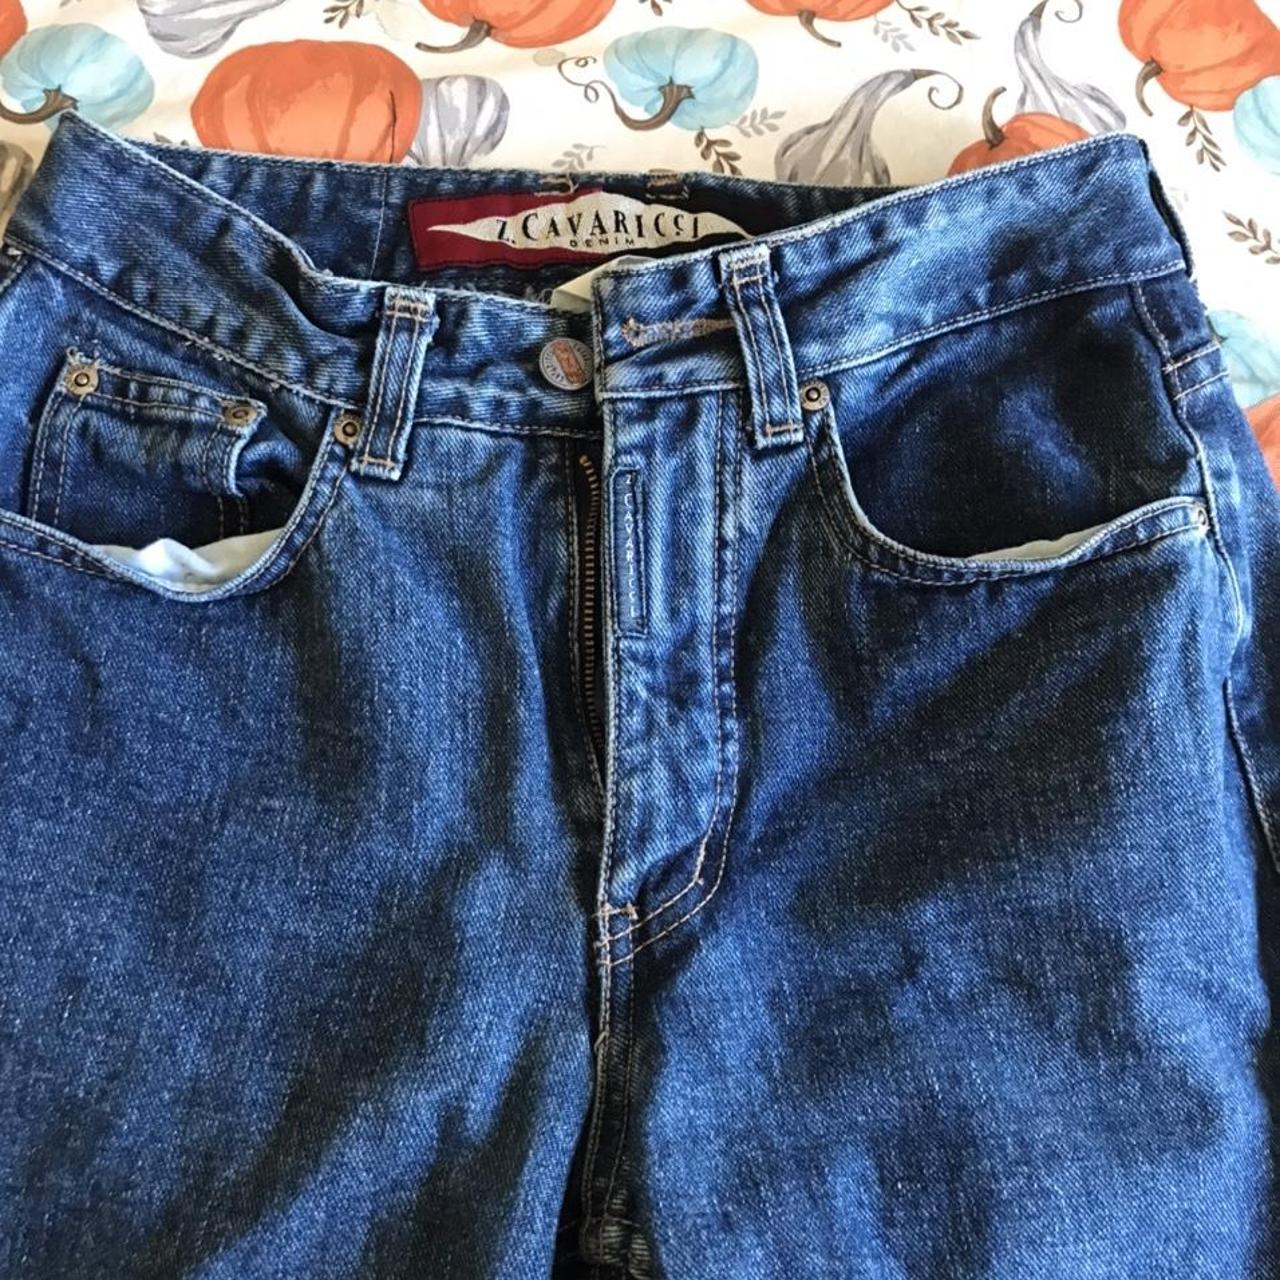 Vintage 90s Z. CAVARICCI jeans in great condition.... - Depop